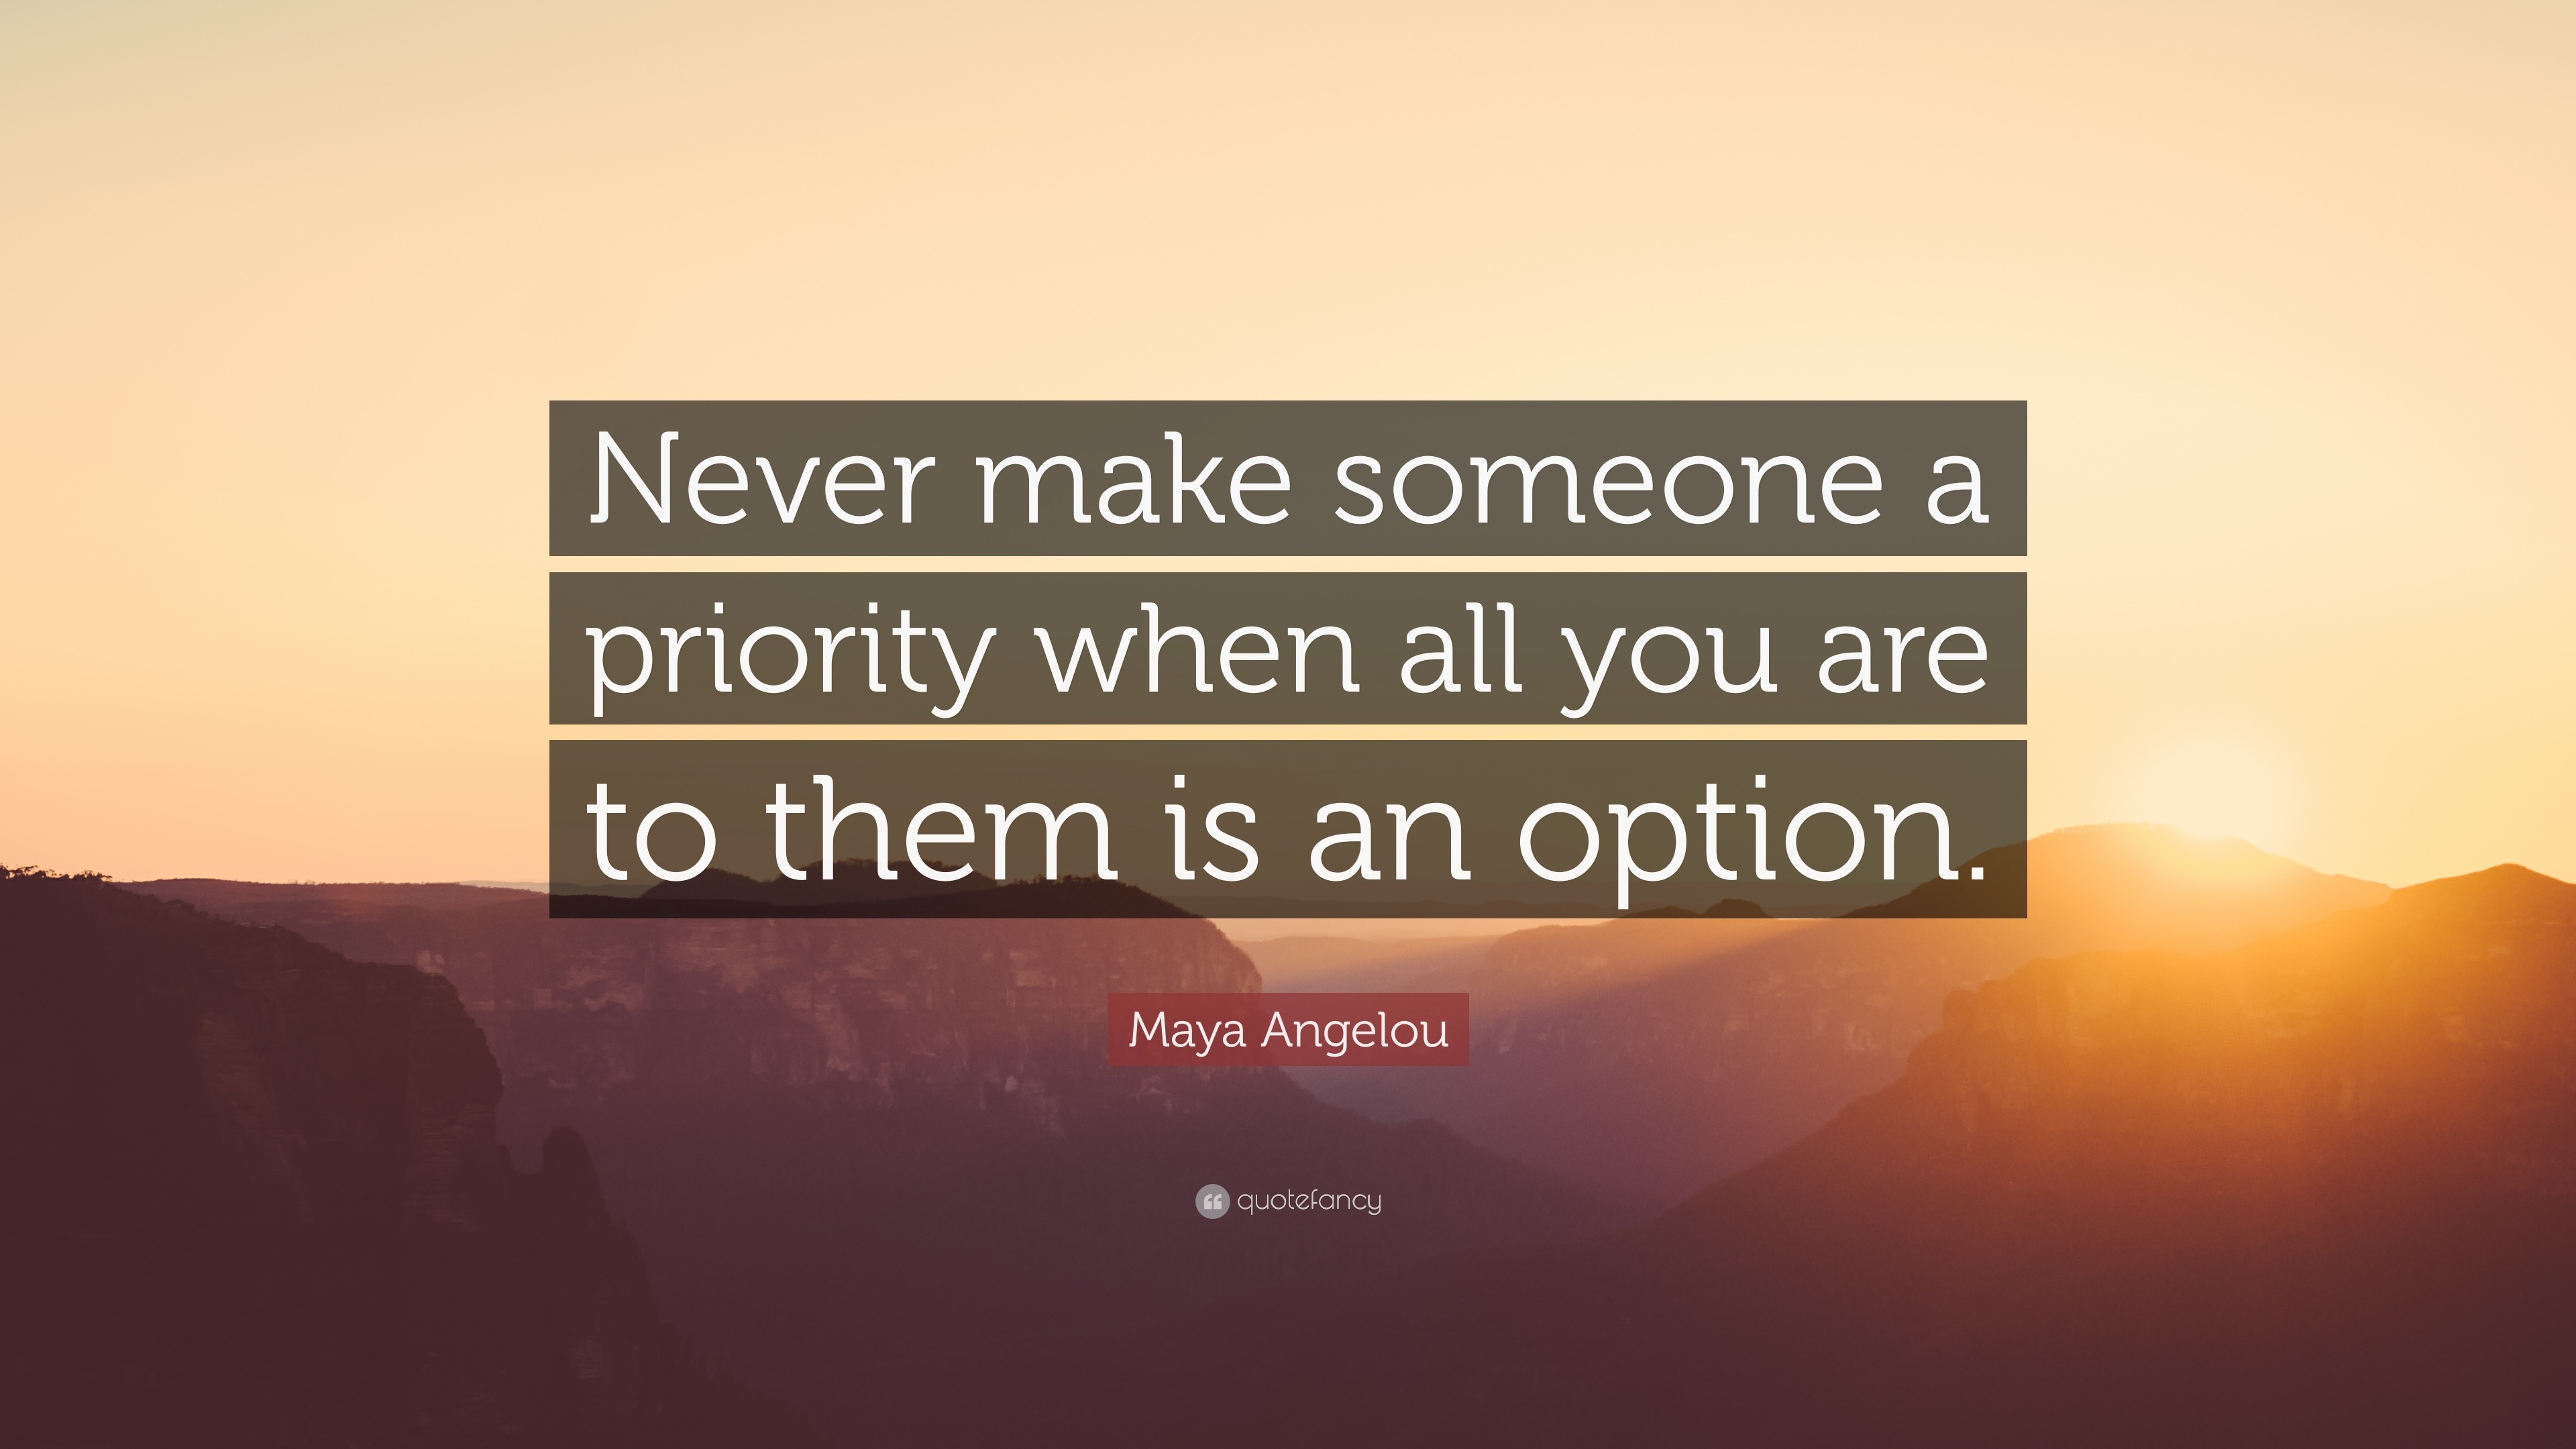 Maya Angelou Quote: “Never make someone a priority when all you are to